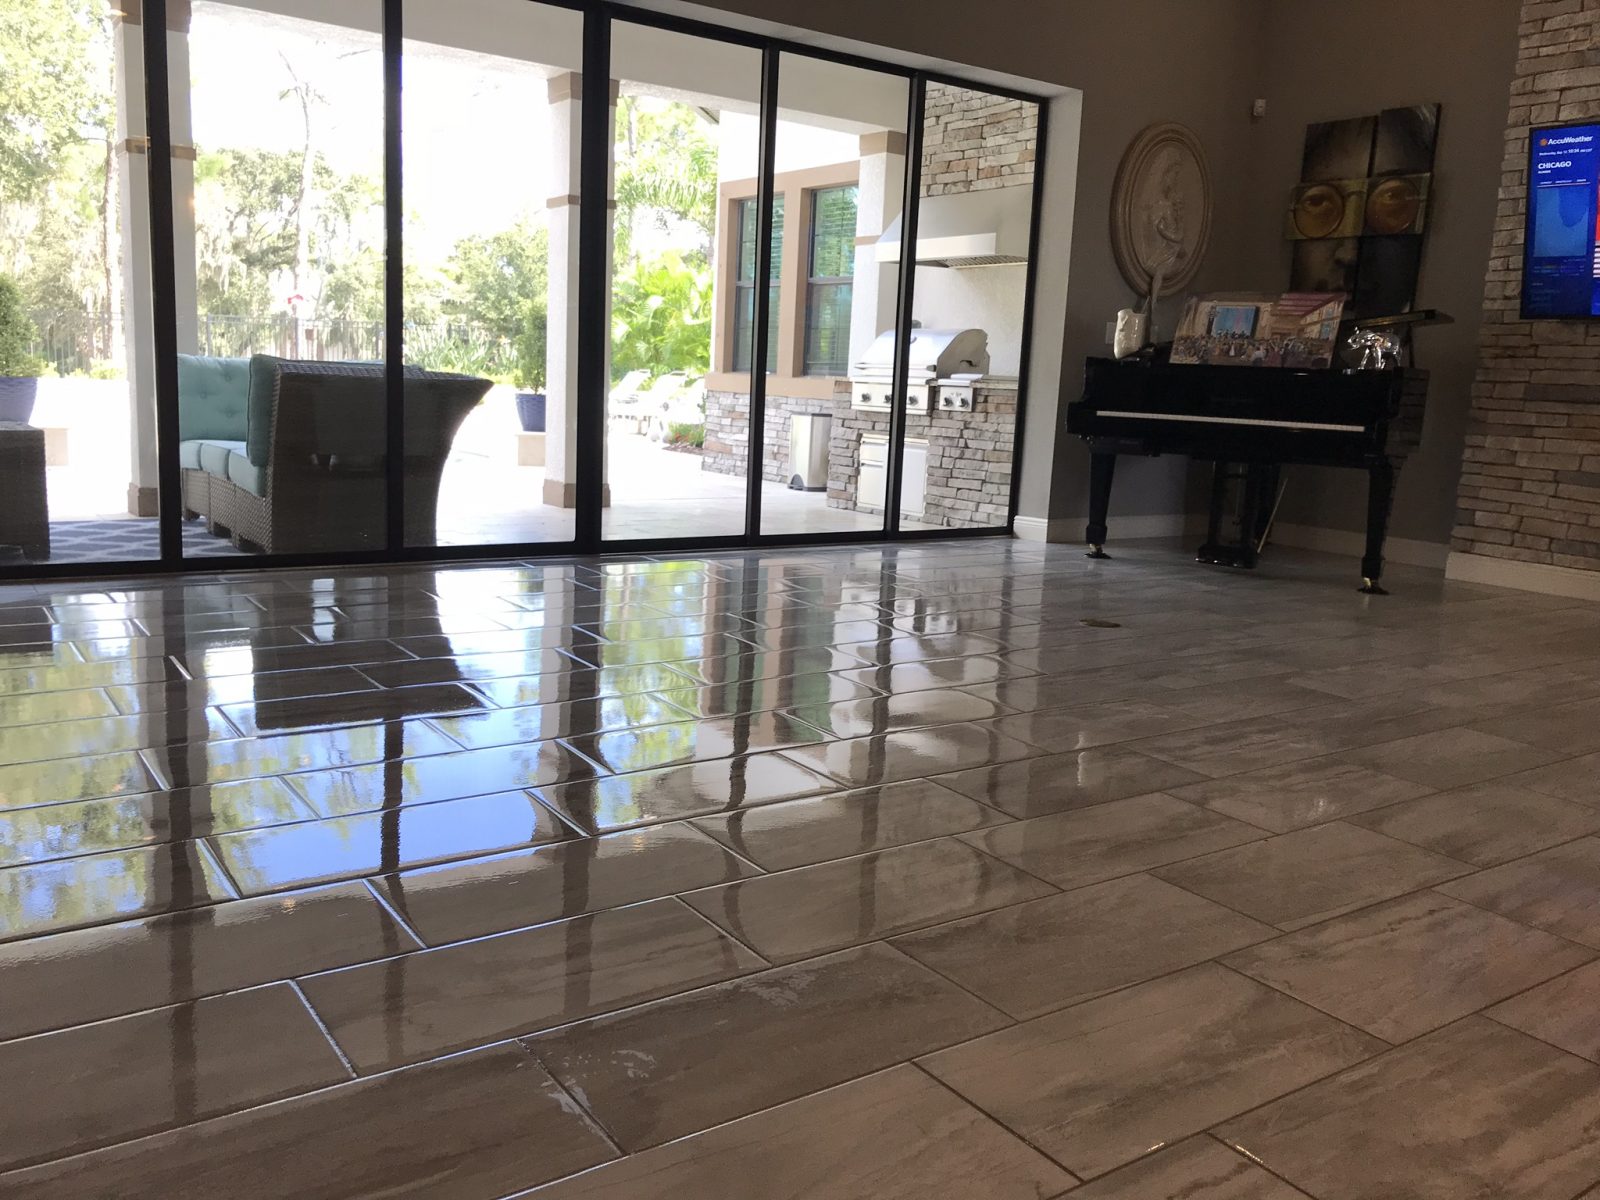 Professional Tile & Grout Cleaning New Port Richey Florida by Howards Cleaning Service